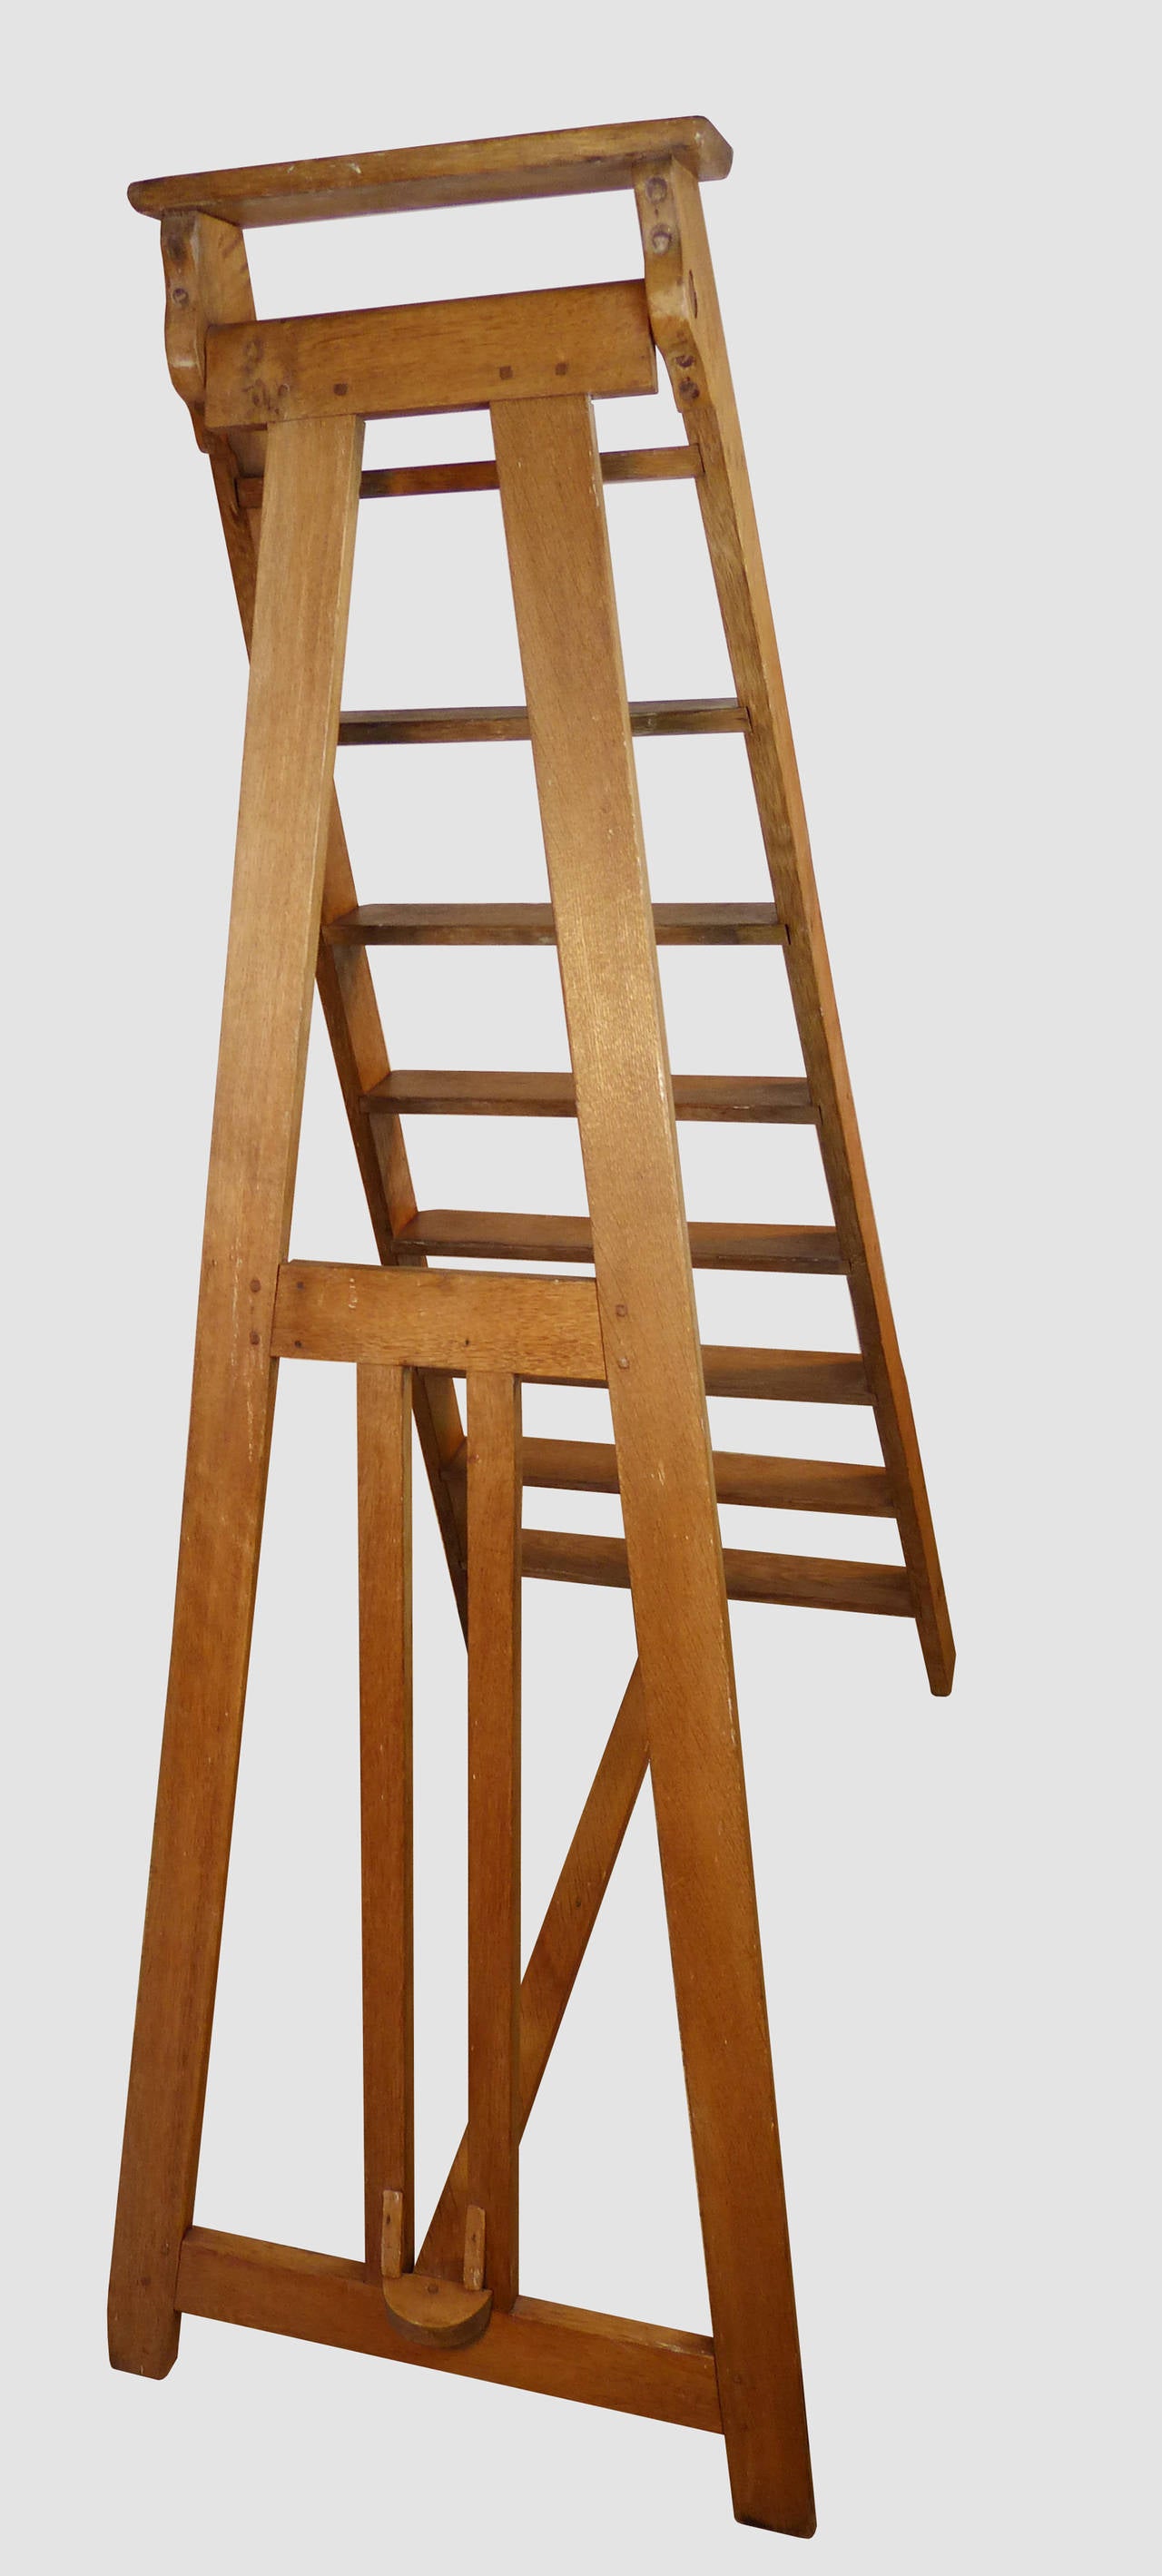 A beautiful antique French ladder, constructed of smoothly worn blond wood. It has a rich patina, and comes from a renowned Parisian antique dealer. The ladder has nine steps, and is solidly constructed.